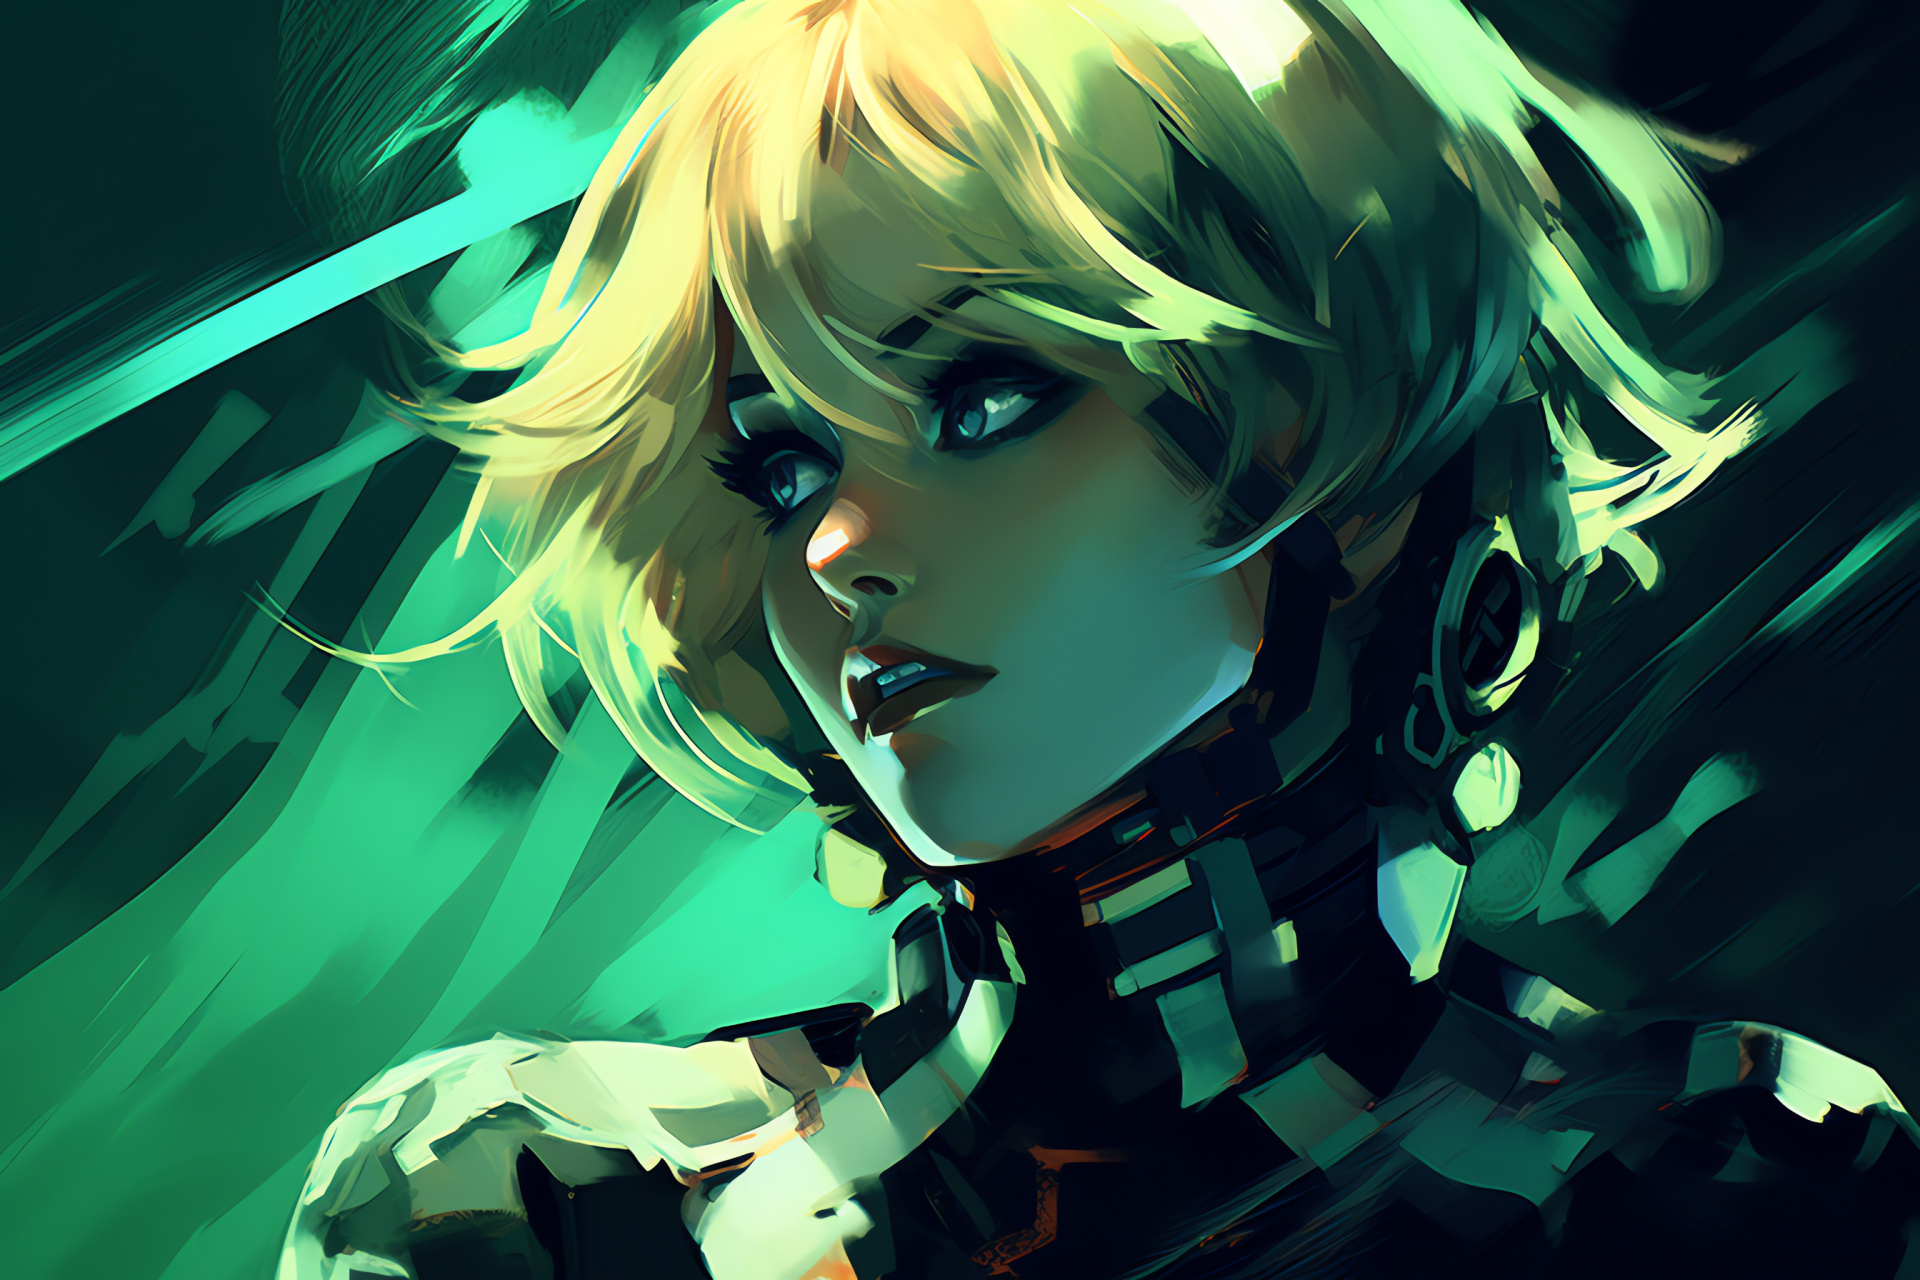 Aigis from Persona 3, Dark Hour ambiance, Green luminescence, Shadow adversaries, Tense atmosphere, HD Desktop Image